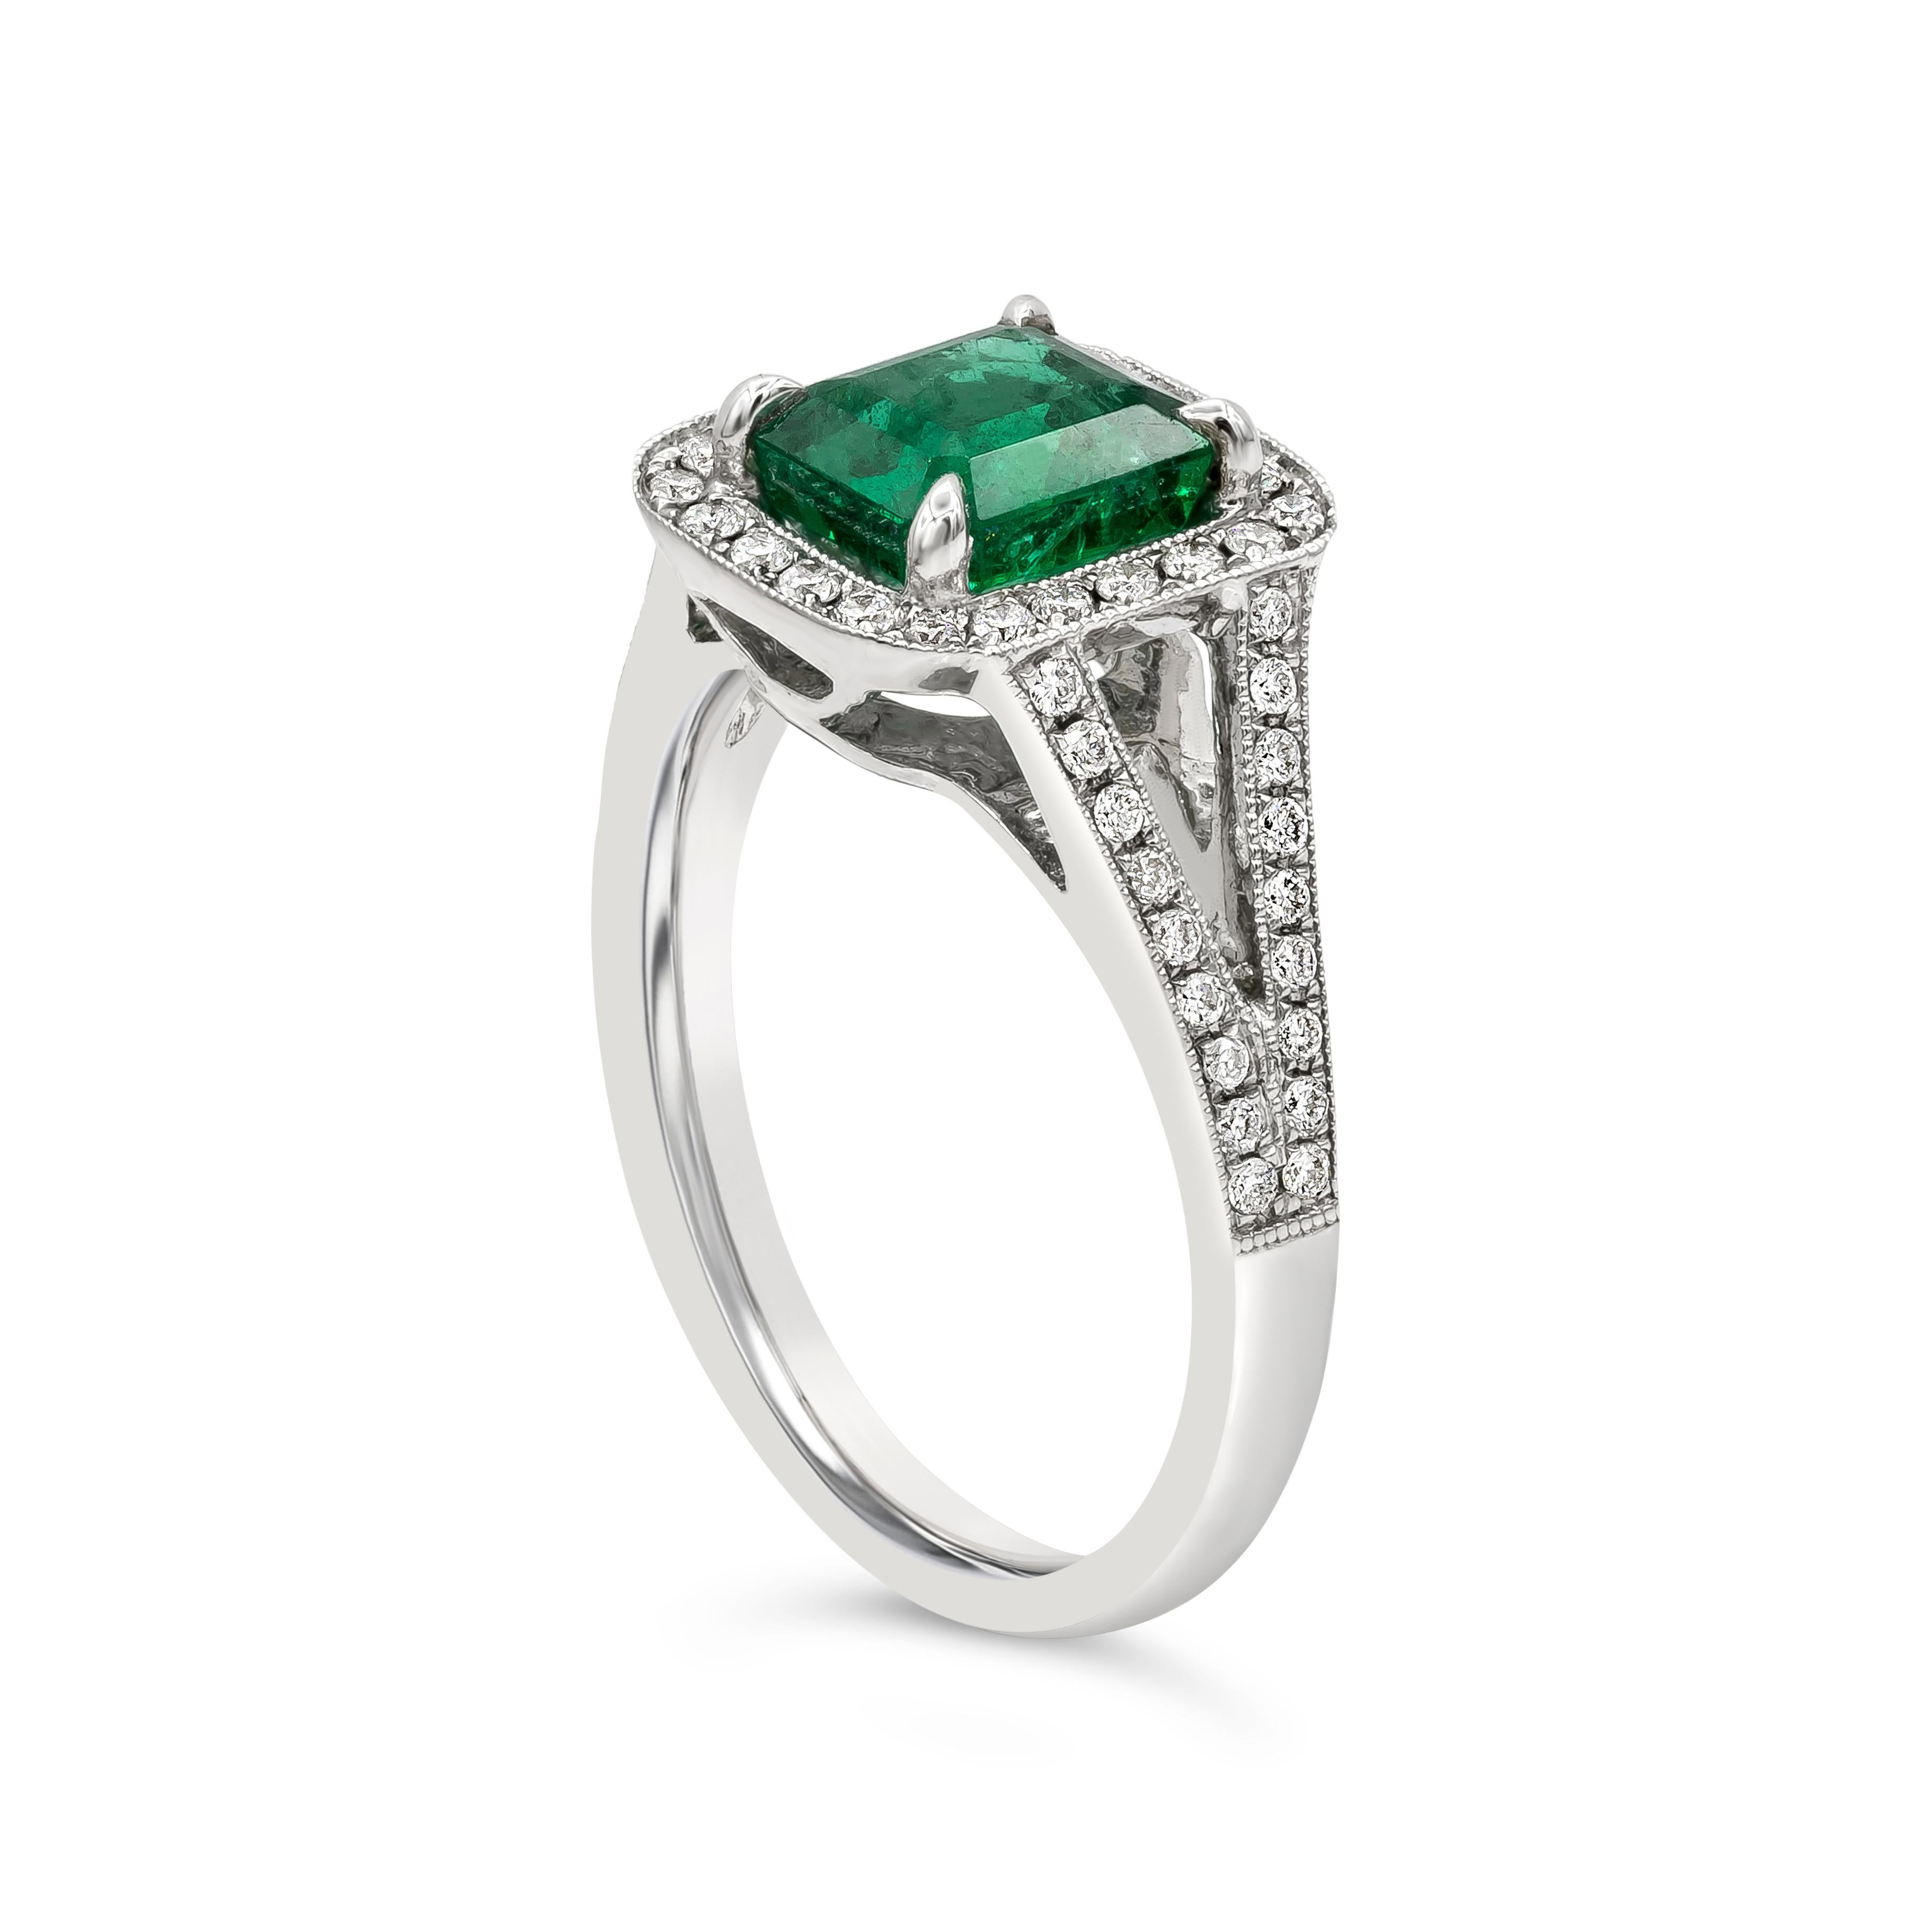 A beautiful engagement ring, featuring a 1.68 carats emerald cut green emerald at the center. Surrounded by a single row of round brilliant cut diamonds set in an antique style split-shank made of 18K white gold. Accent diamonds weigh 0.40 carat